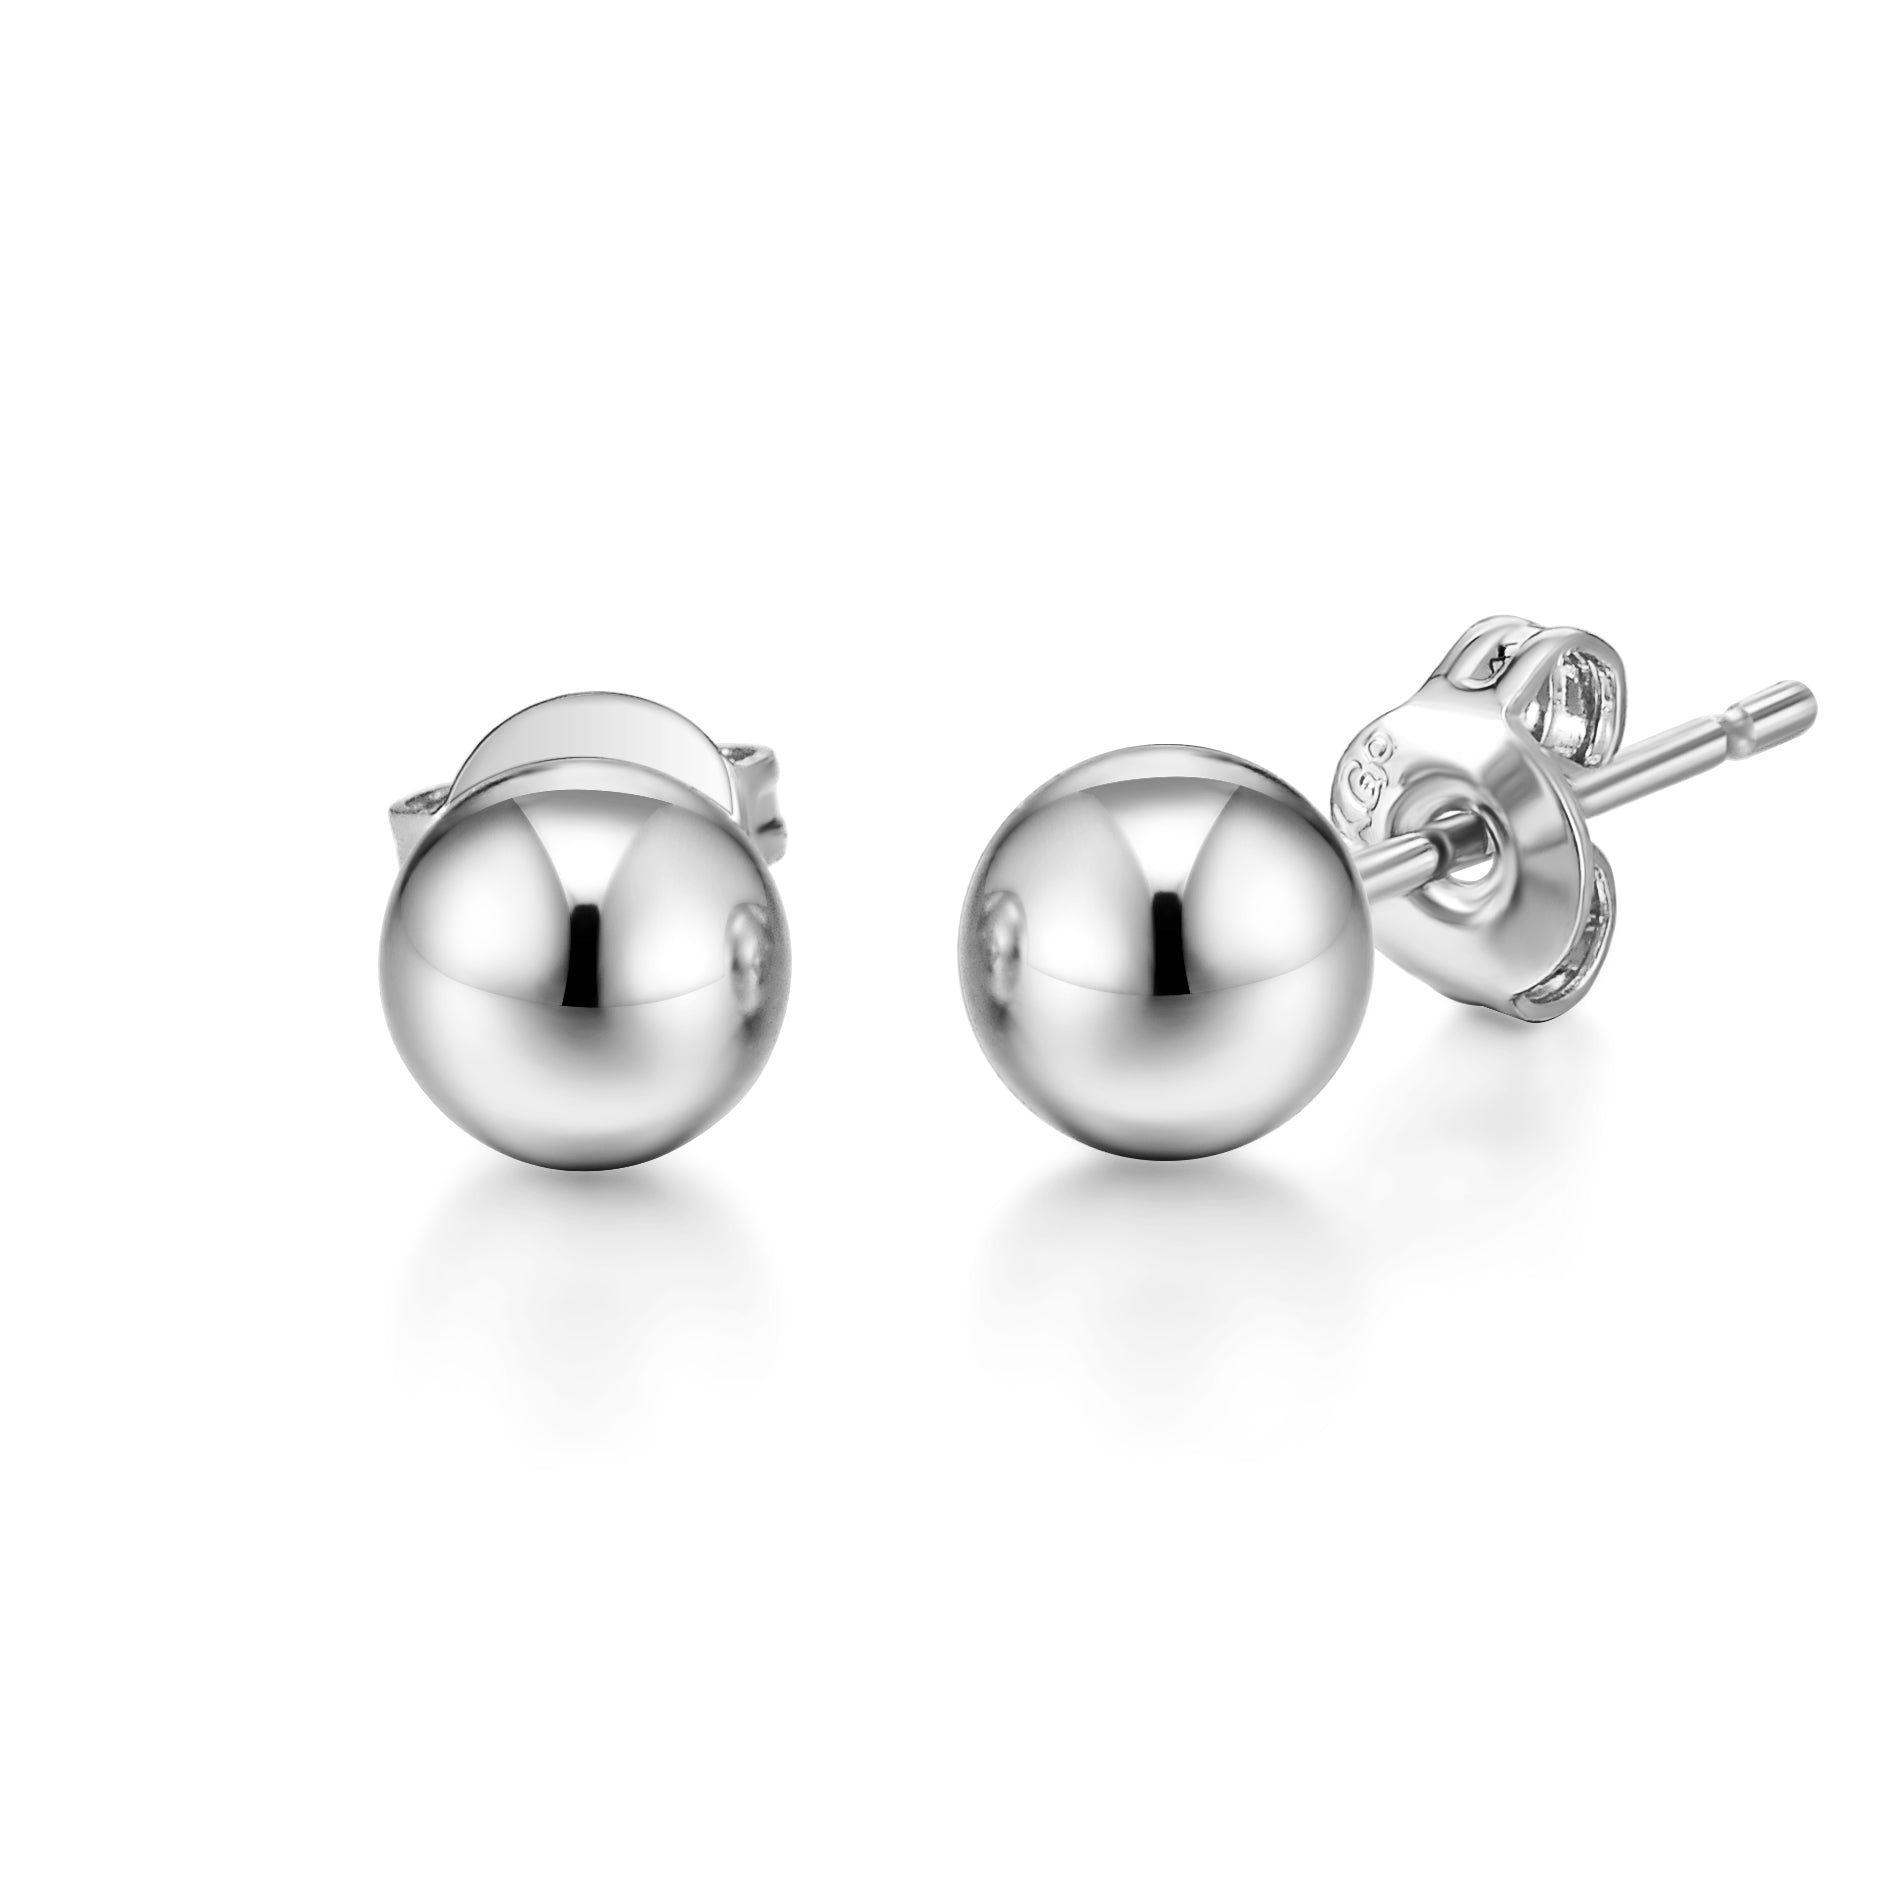 Silver Plated Ball Stud Earrings